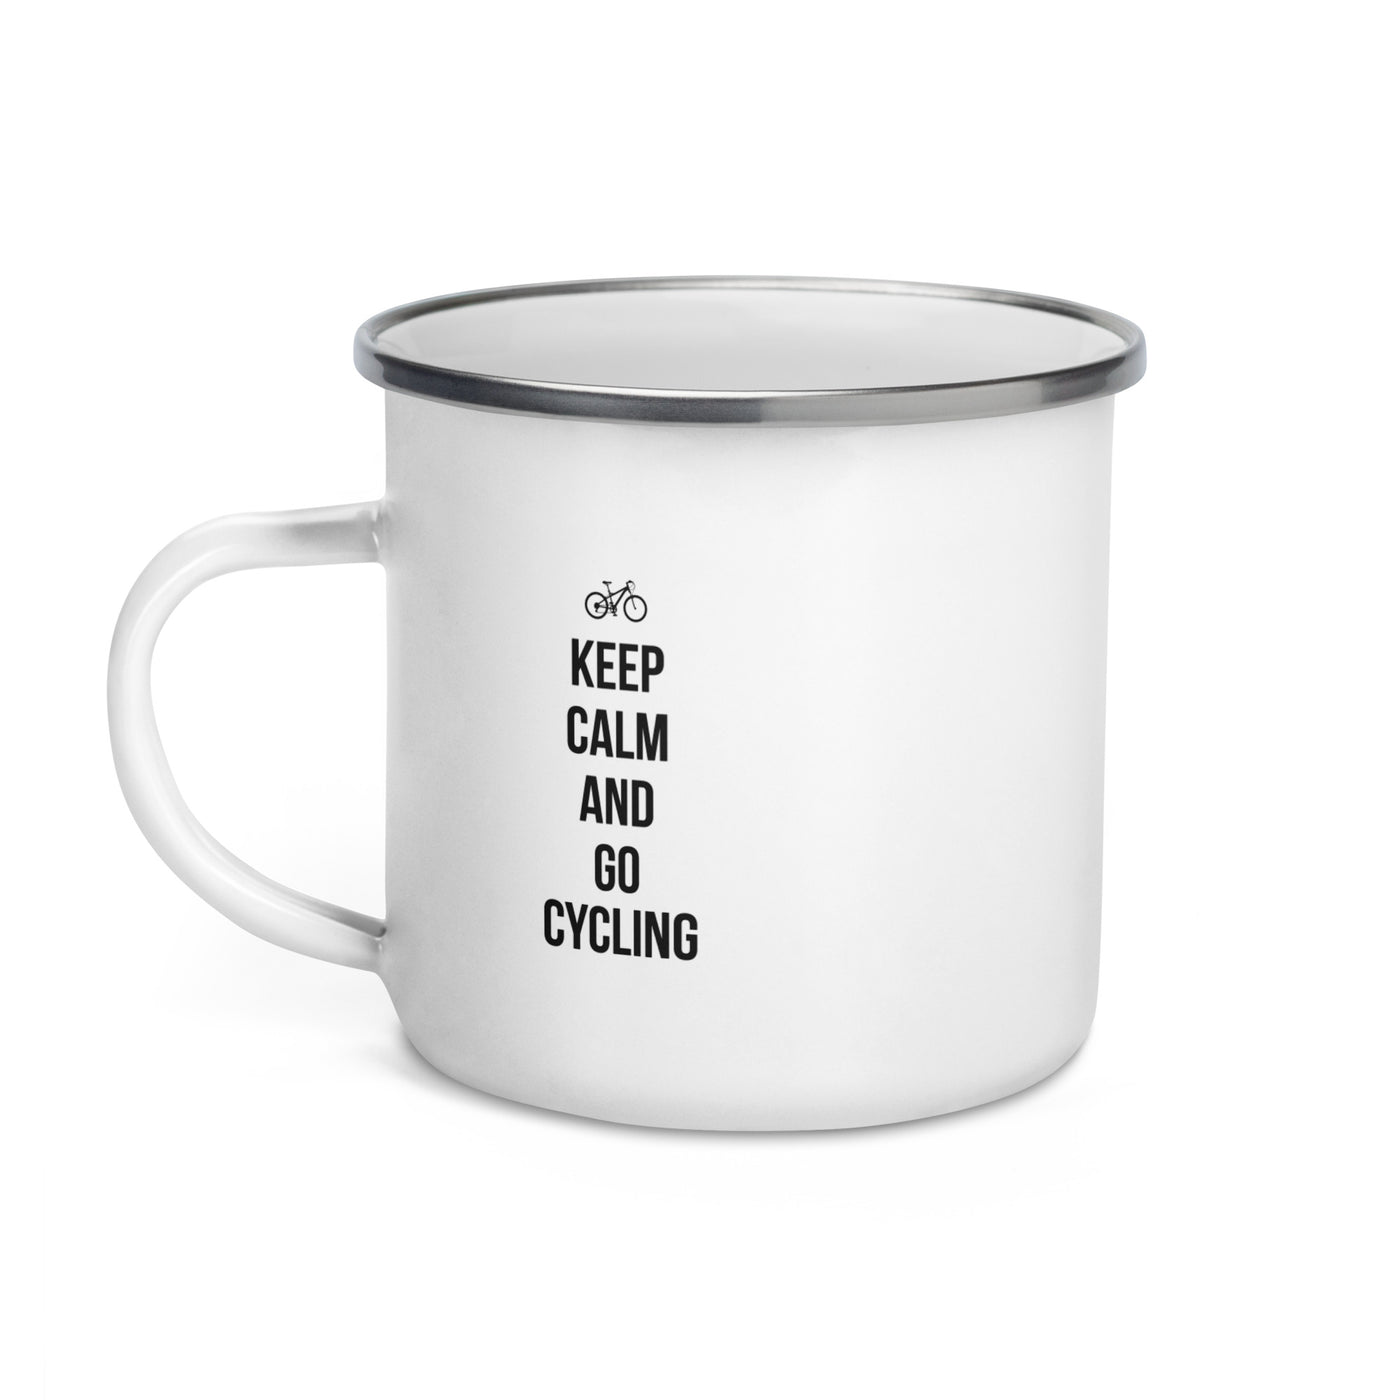 Keep Calm And Go Cycling - Emaille Tasse fahrrad